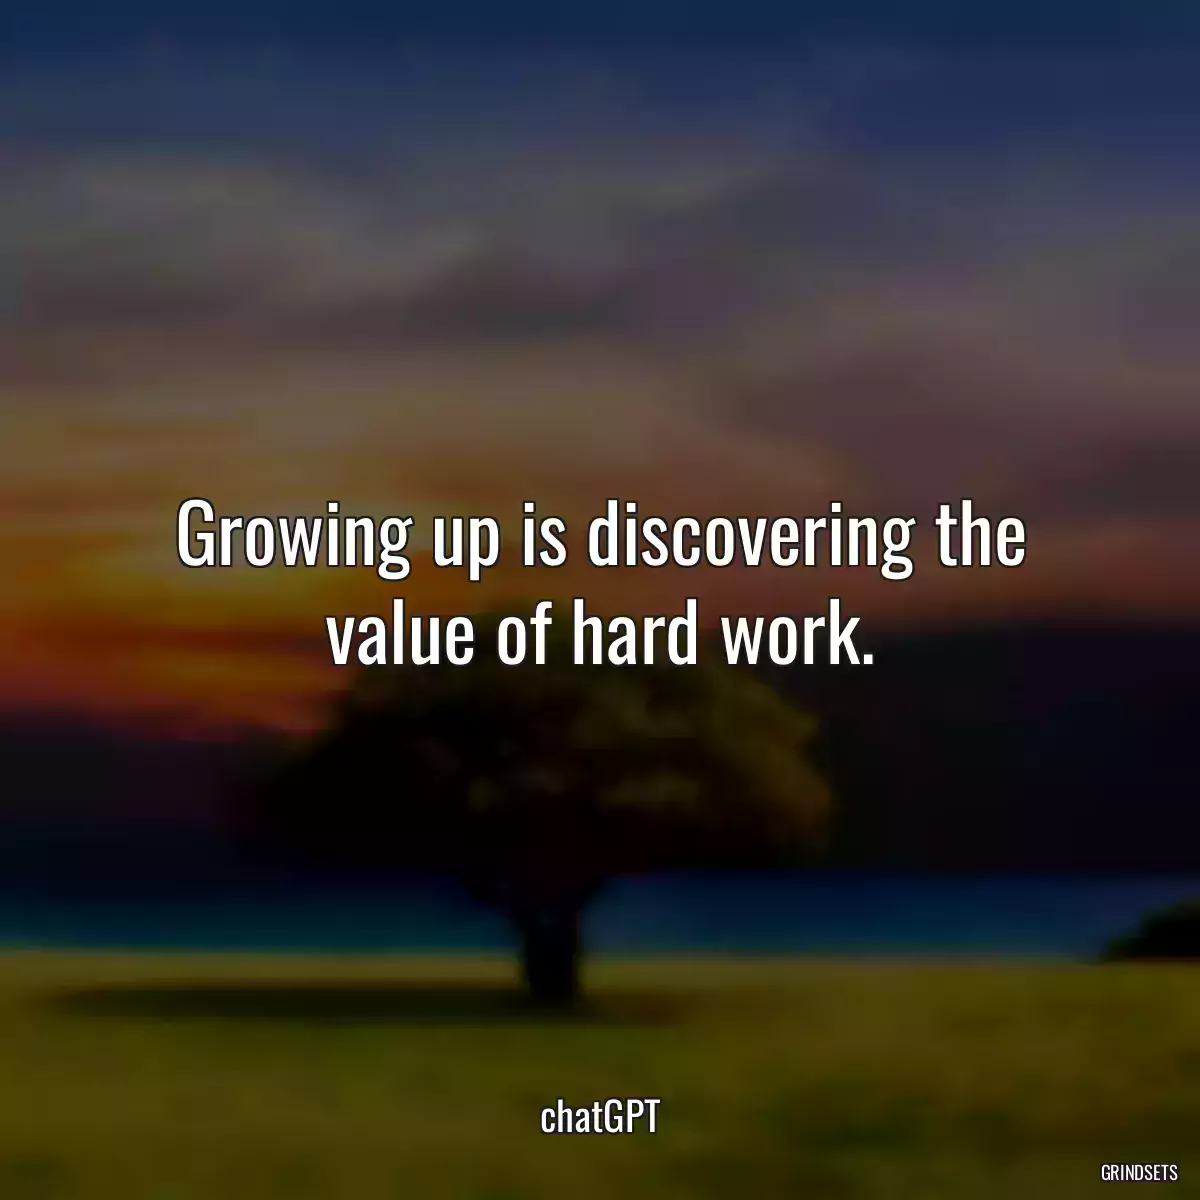 Growing up is discovering the value of hard work.